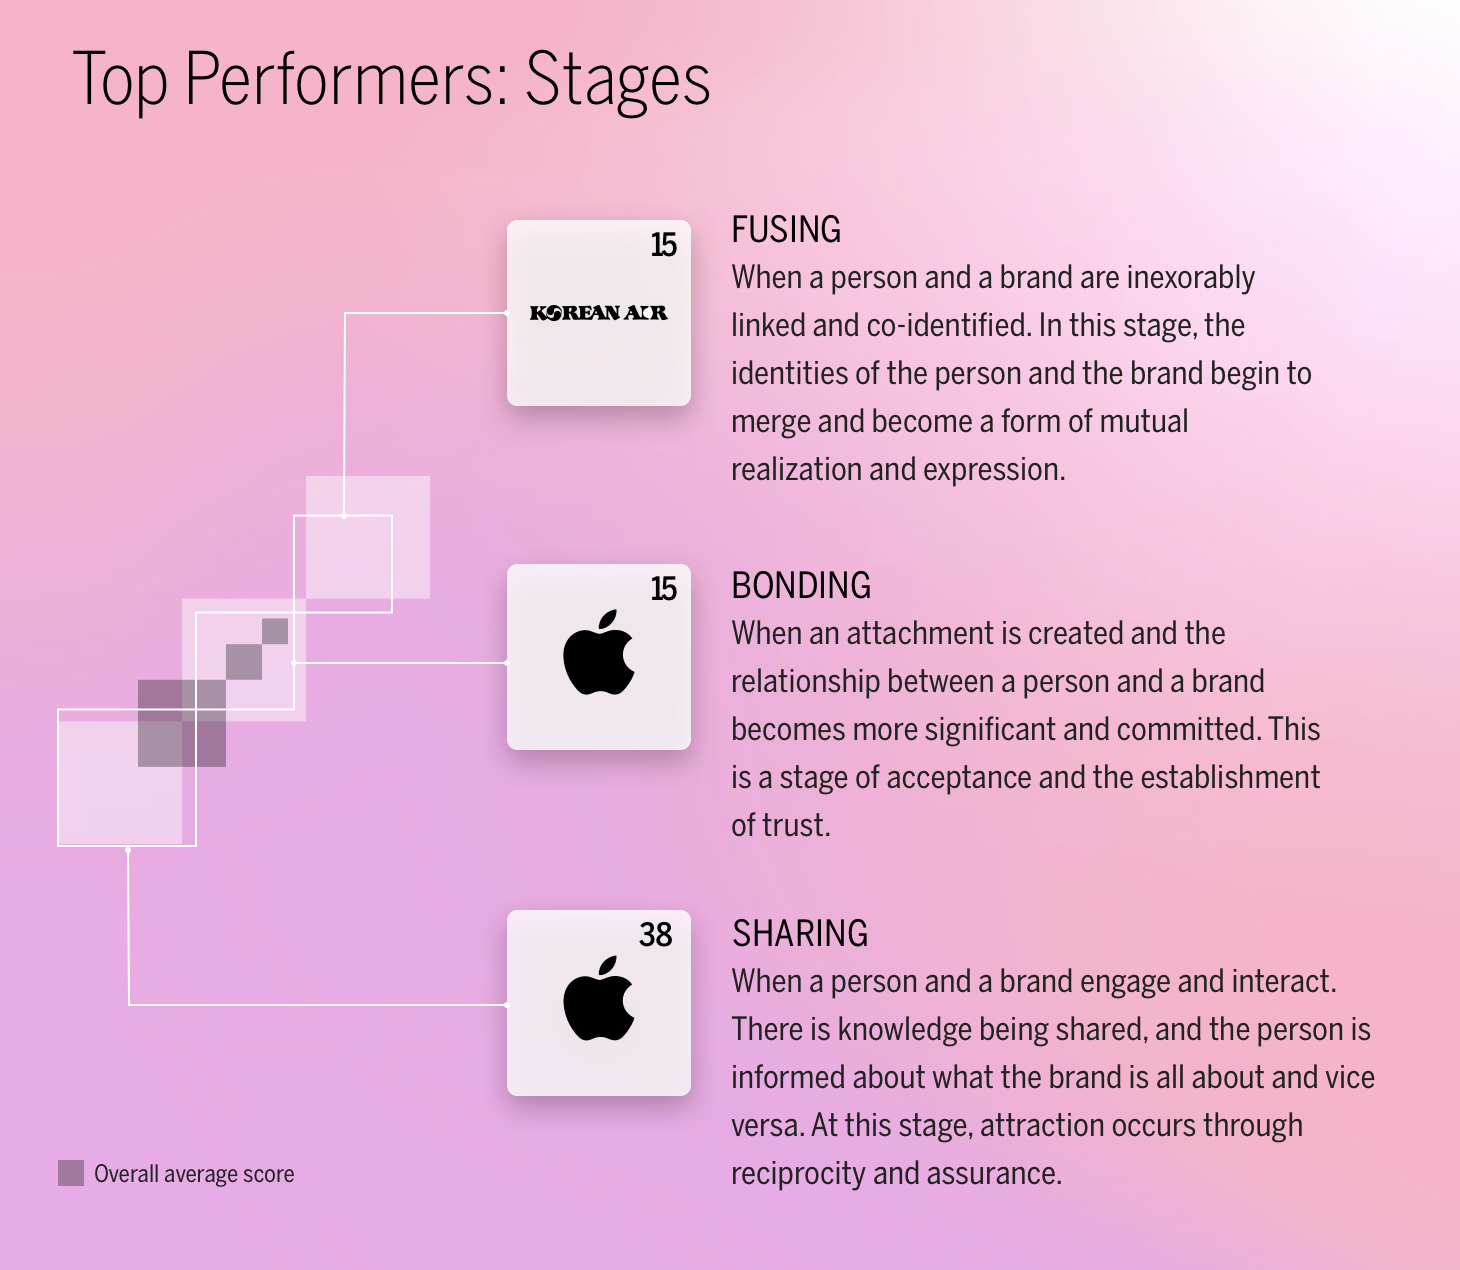 diagram showing Top Performers Stages: Fusing, Bonding, Sharing